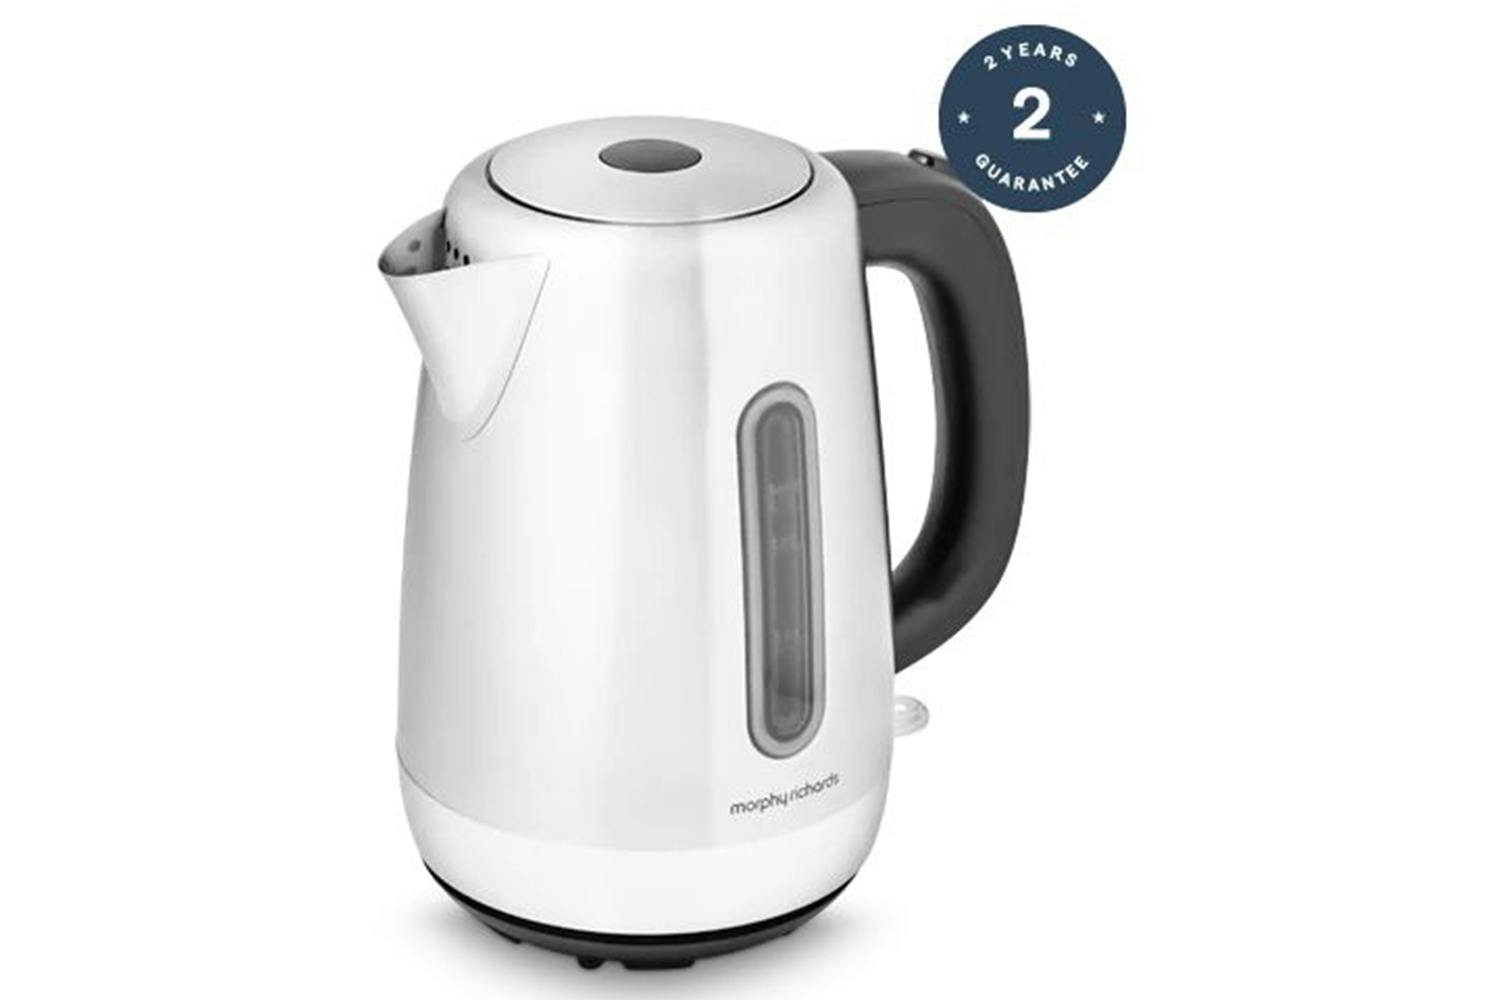 Morphy Richards 1.7L Equip Jug Kettle | 102786 | Stainless Steel